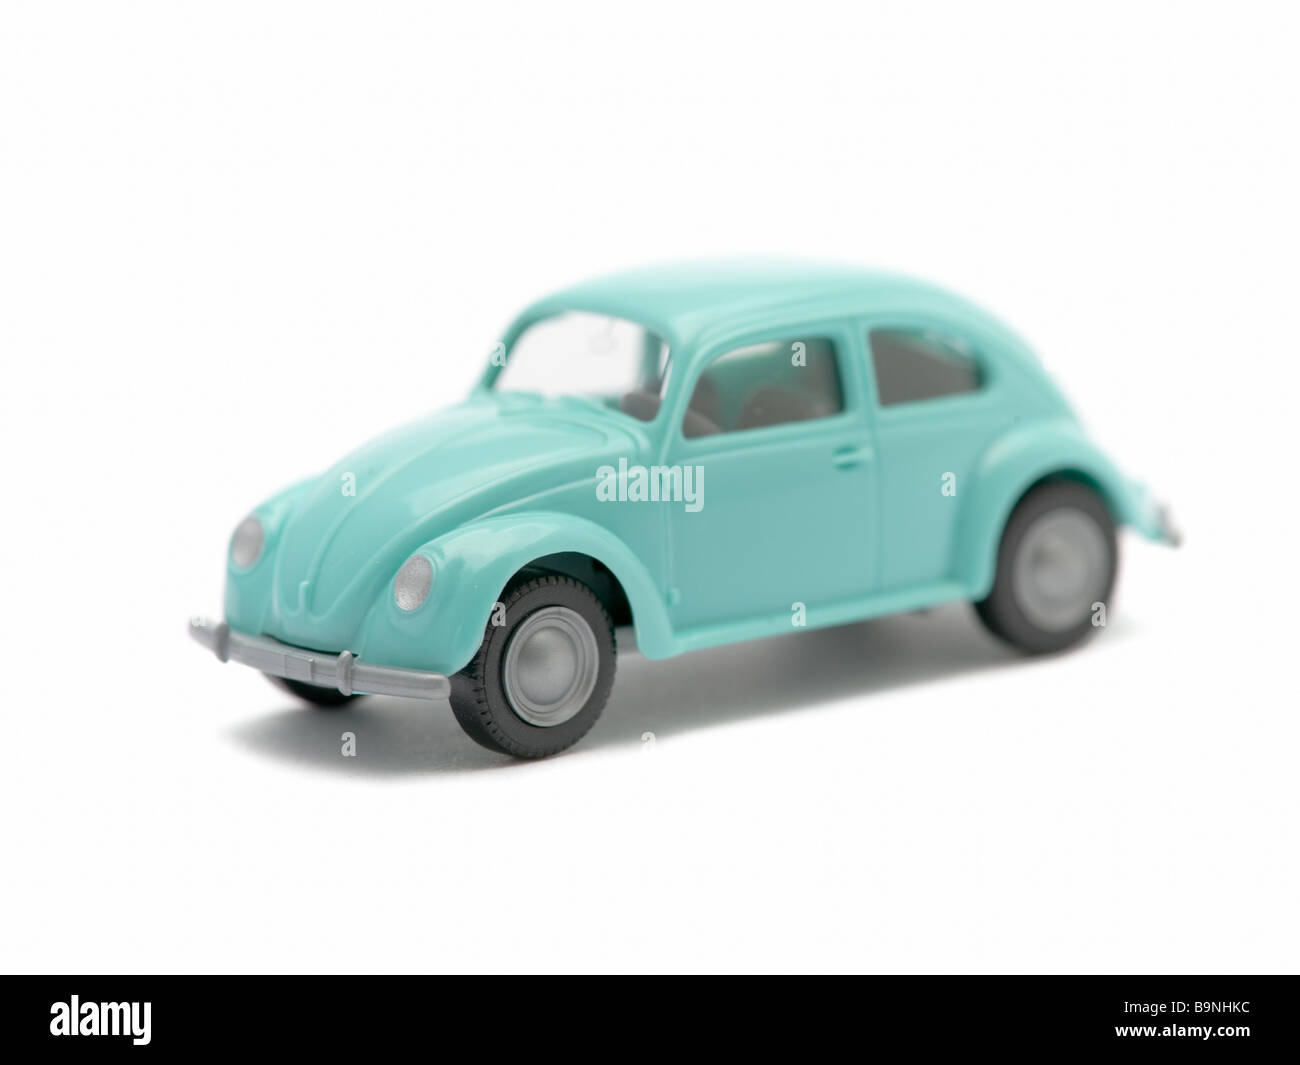 toy of old car isolated on the white background the car model is more than 50 years old Stock Photo